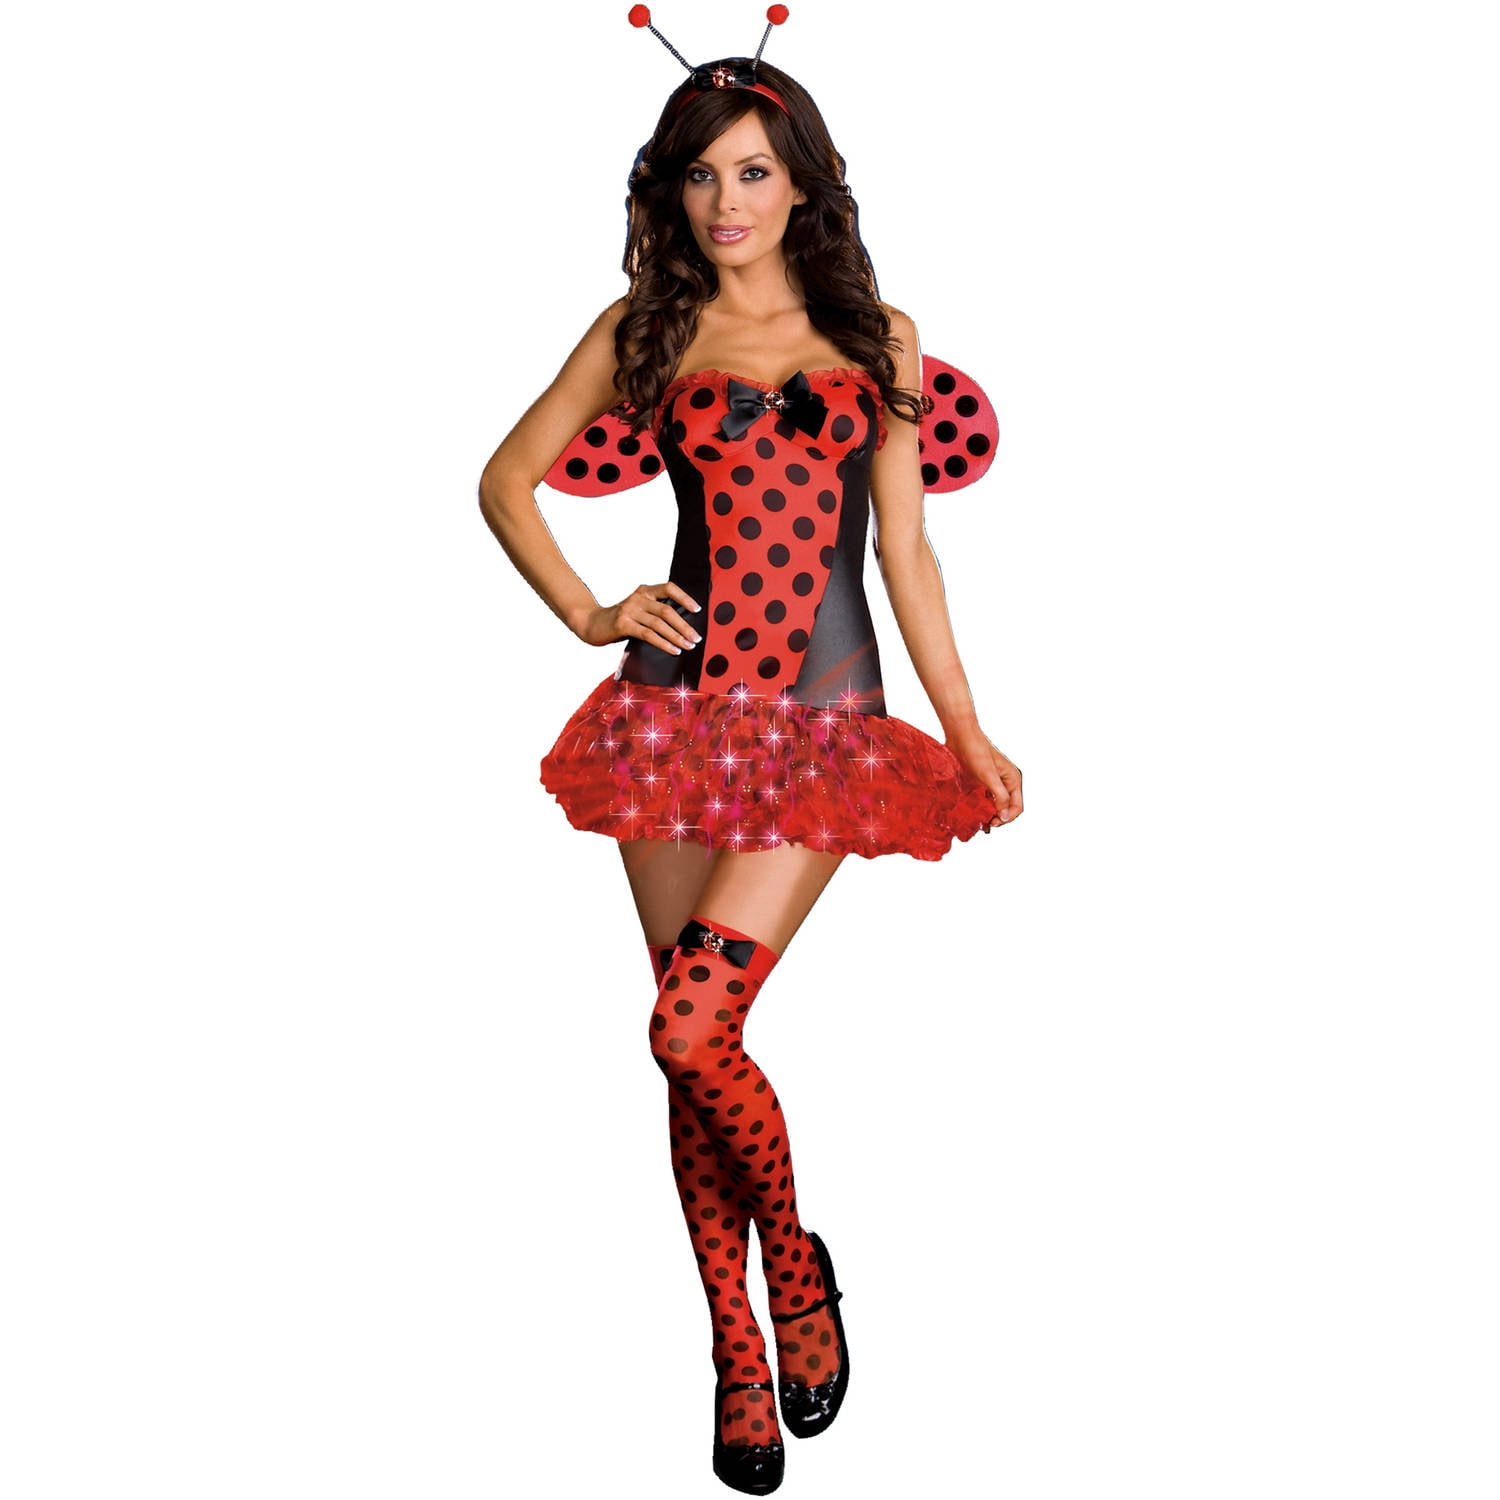 Ladies BUMBLE BEE Fancy Dress Costume Adult Insect Party Womens Lady Bug Outfit 